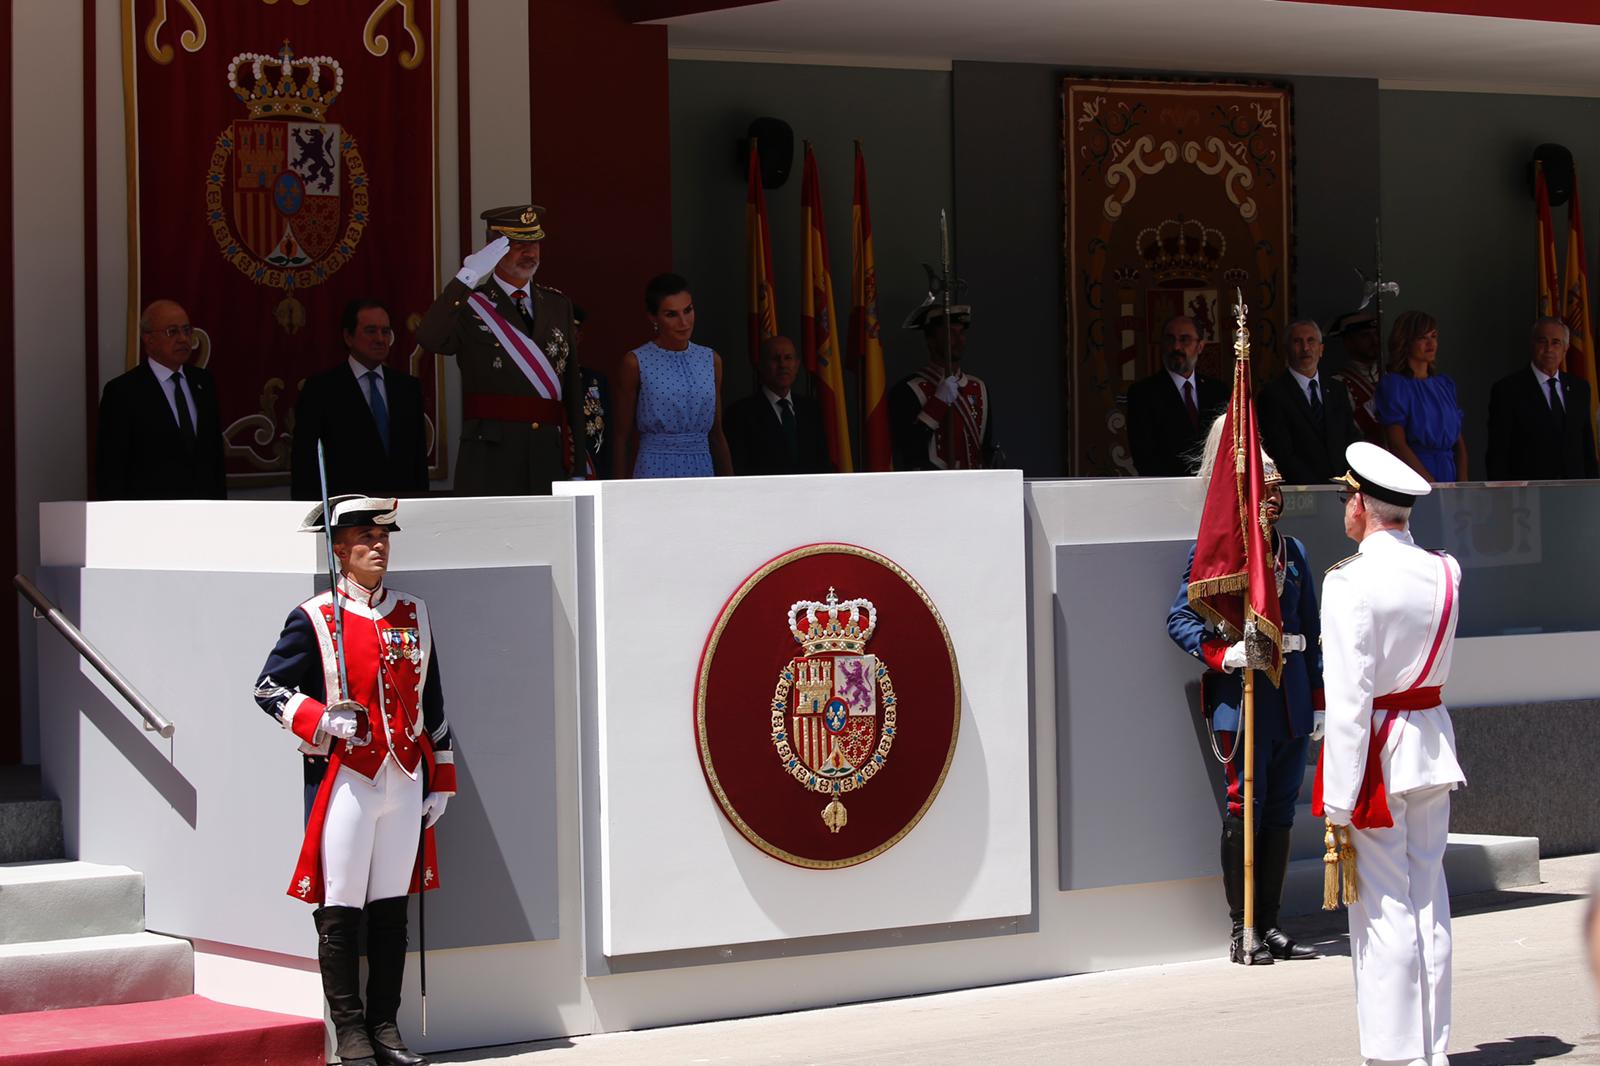 The CHOD greets the King and Queen of Spain